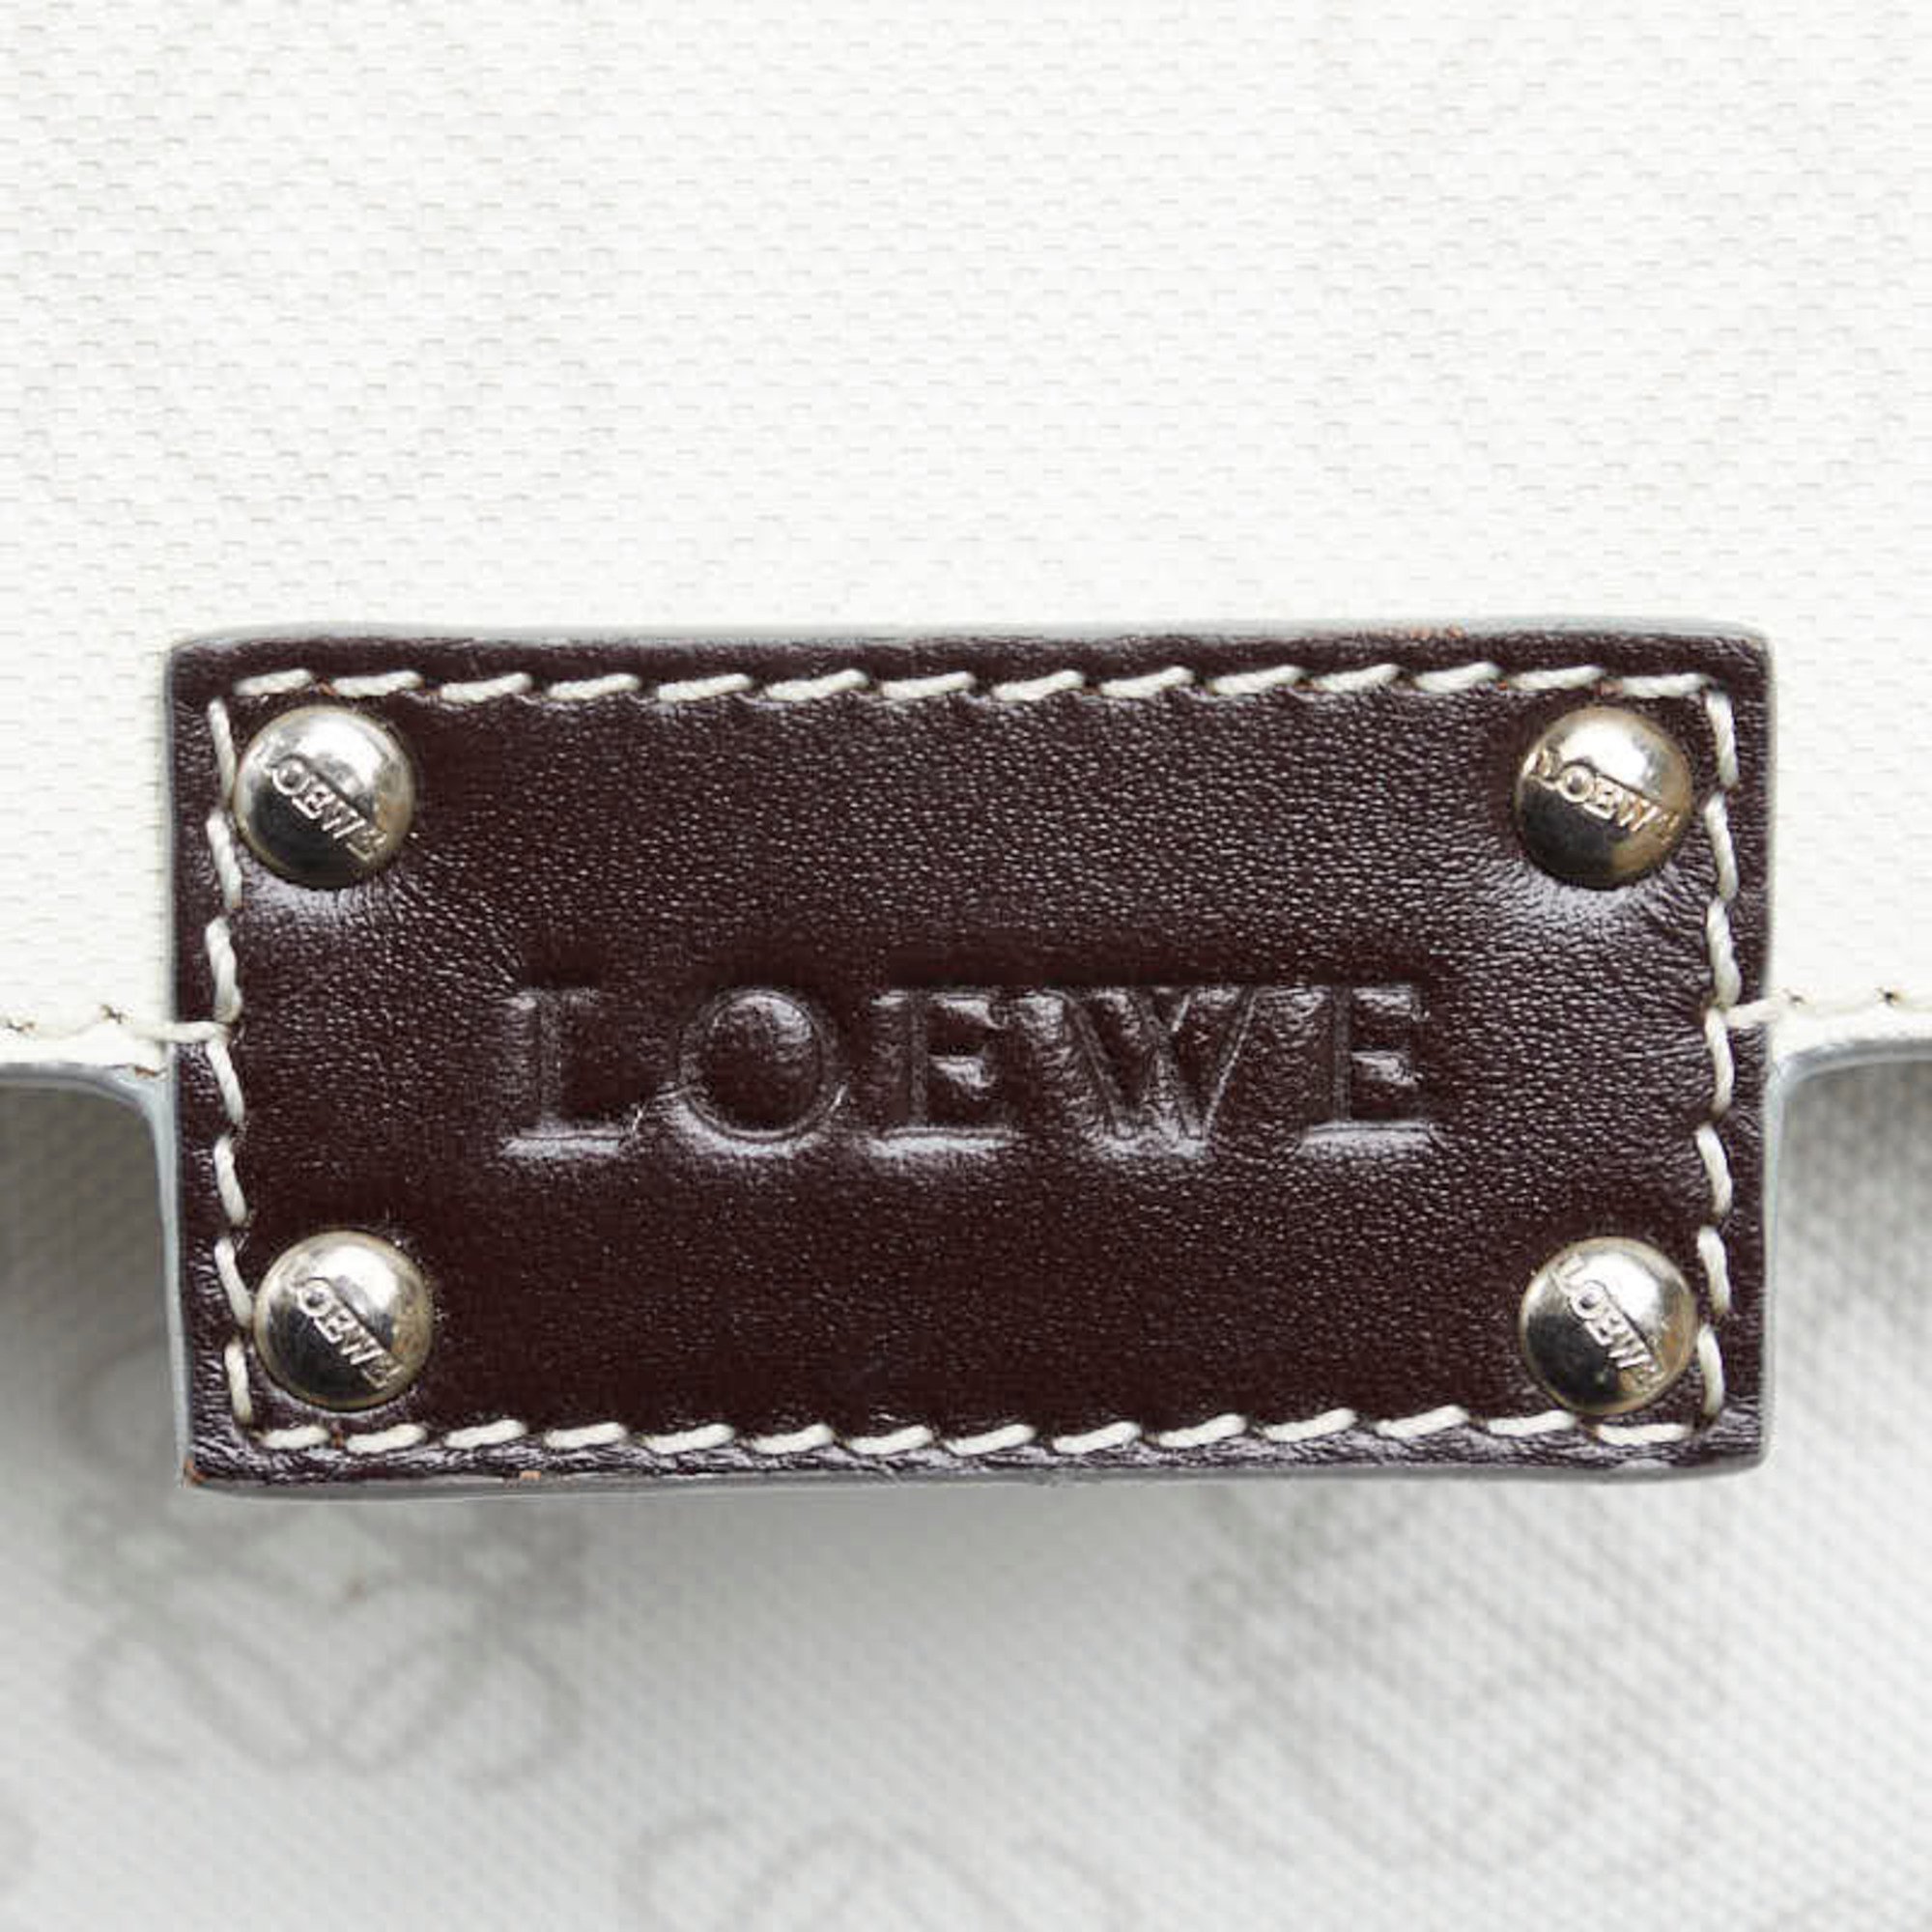 LOEWE Anagram Pouch White PVC Leather Women's